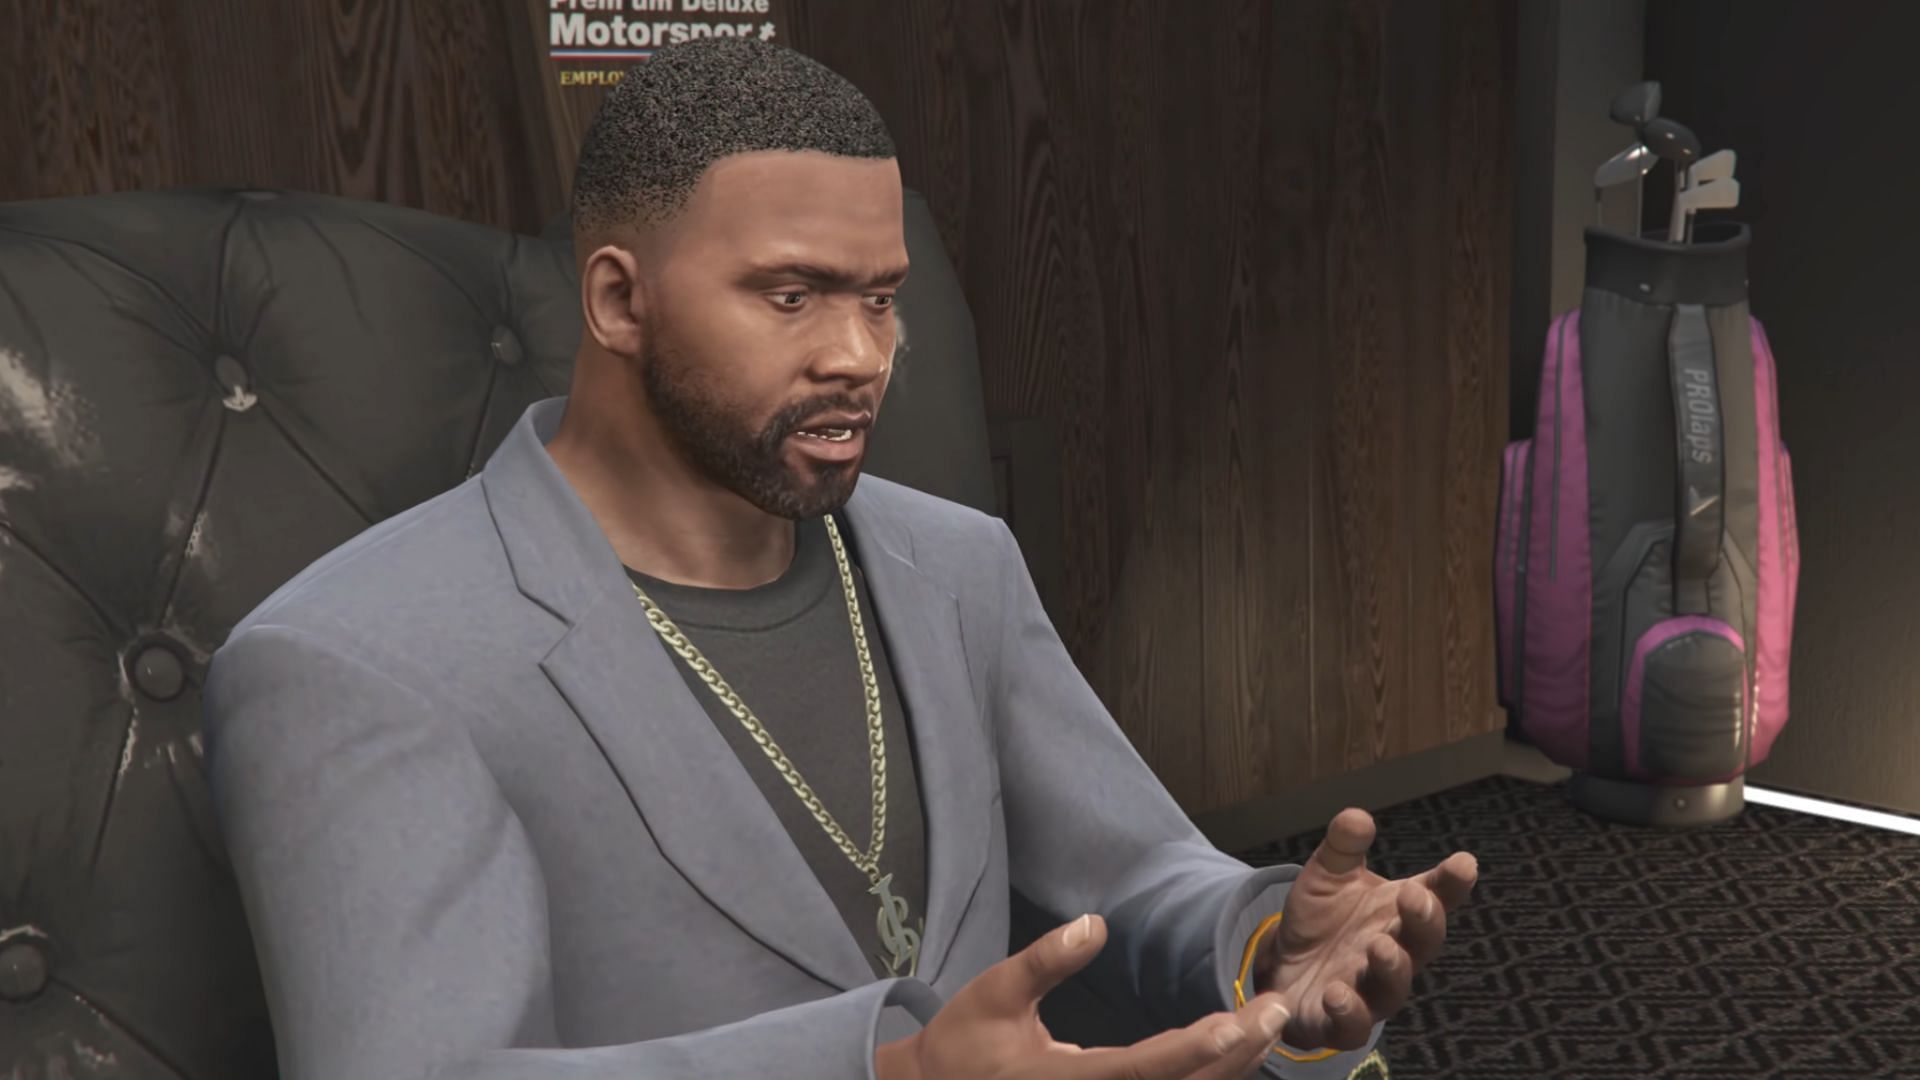 Franklin&#039;s look here is dated to 2021 (Image via Rockstar Games)